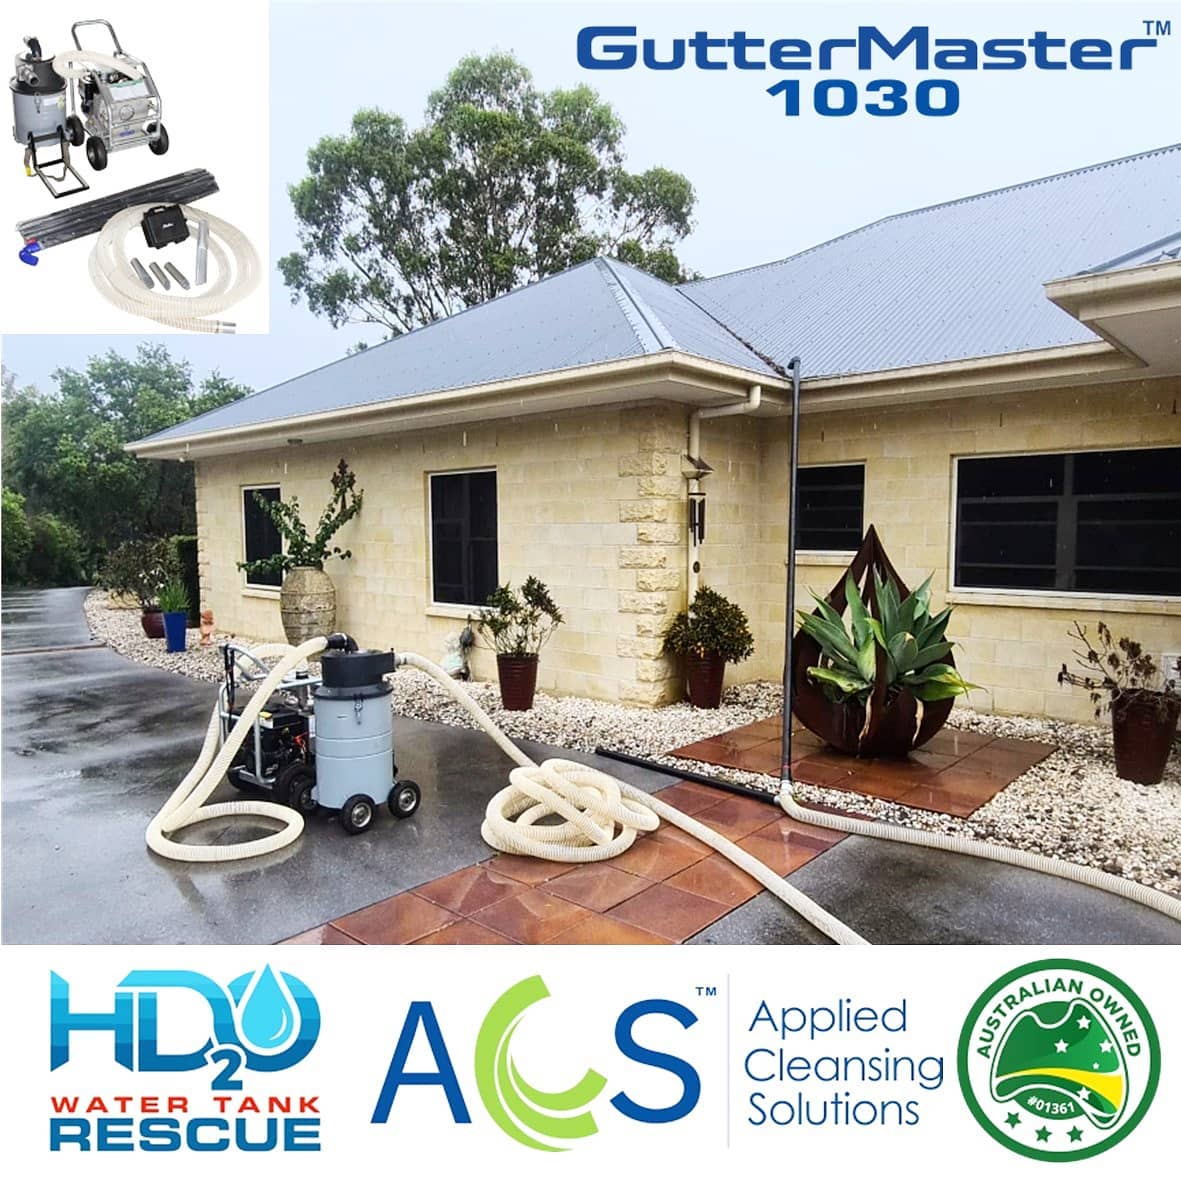 D2O Water Tank Rescue with their gutter vacuum system